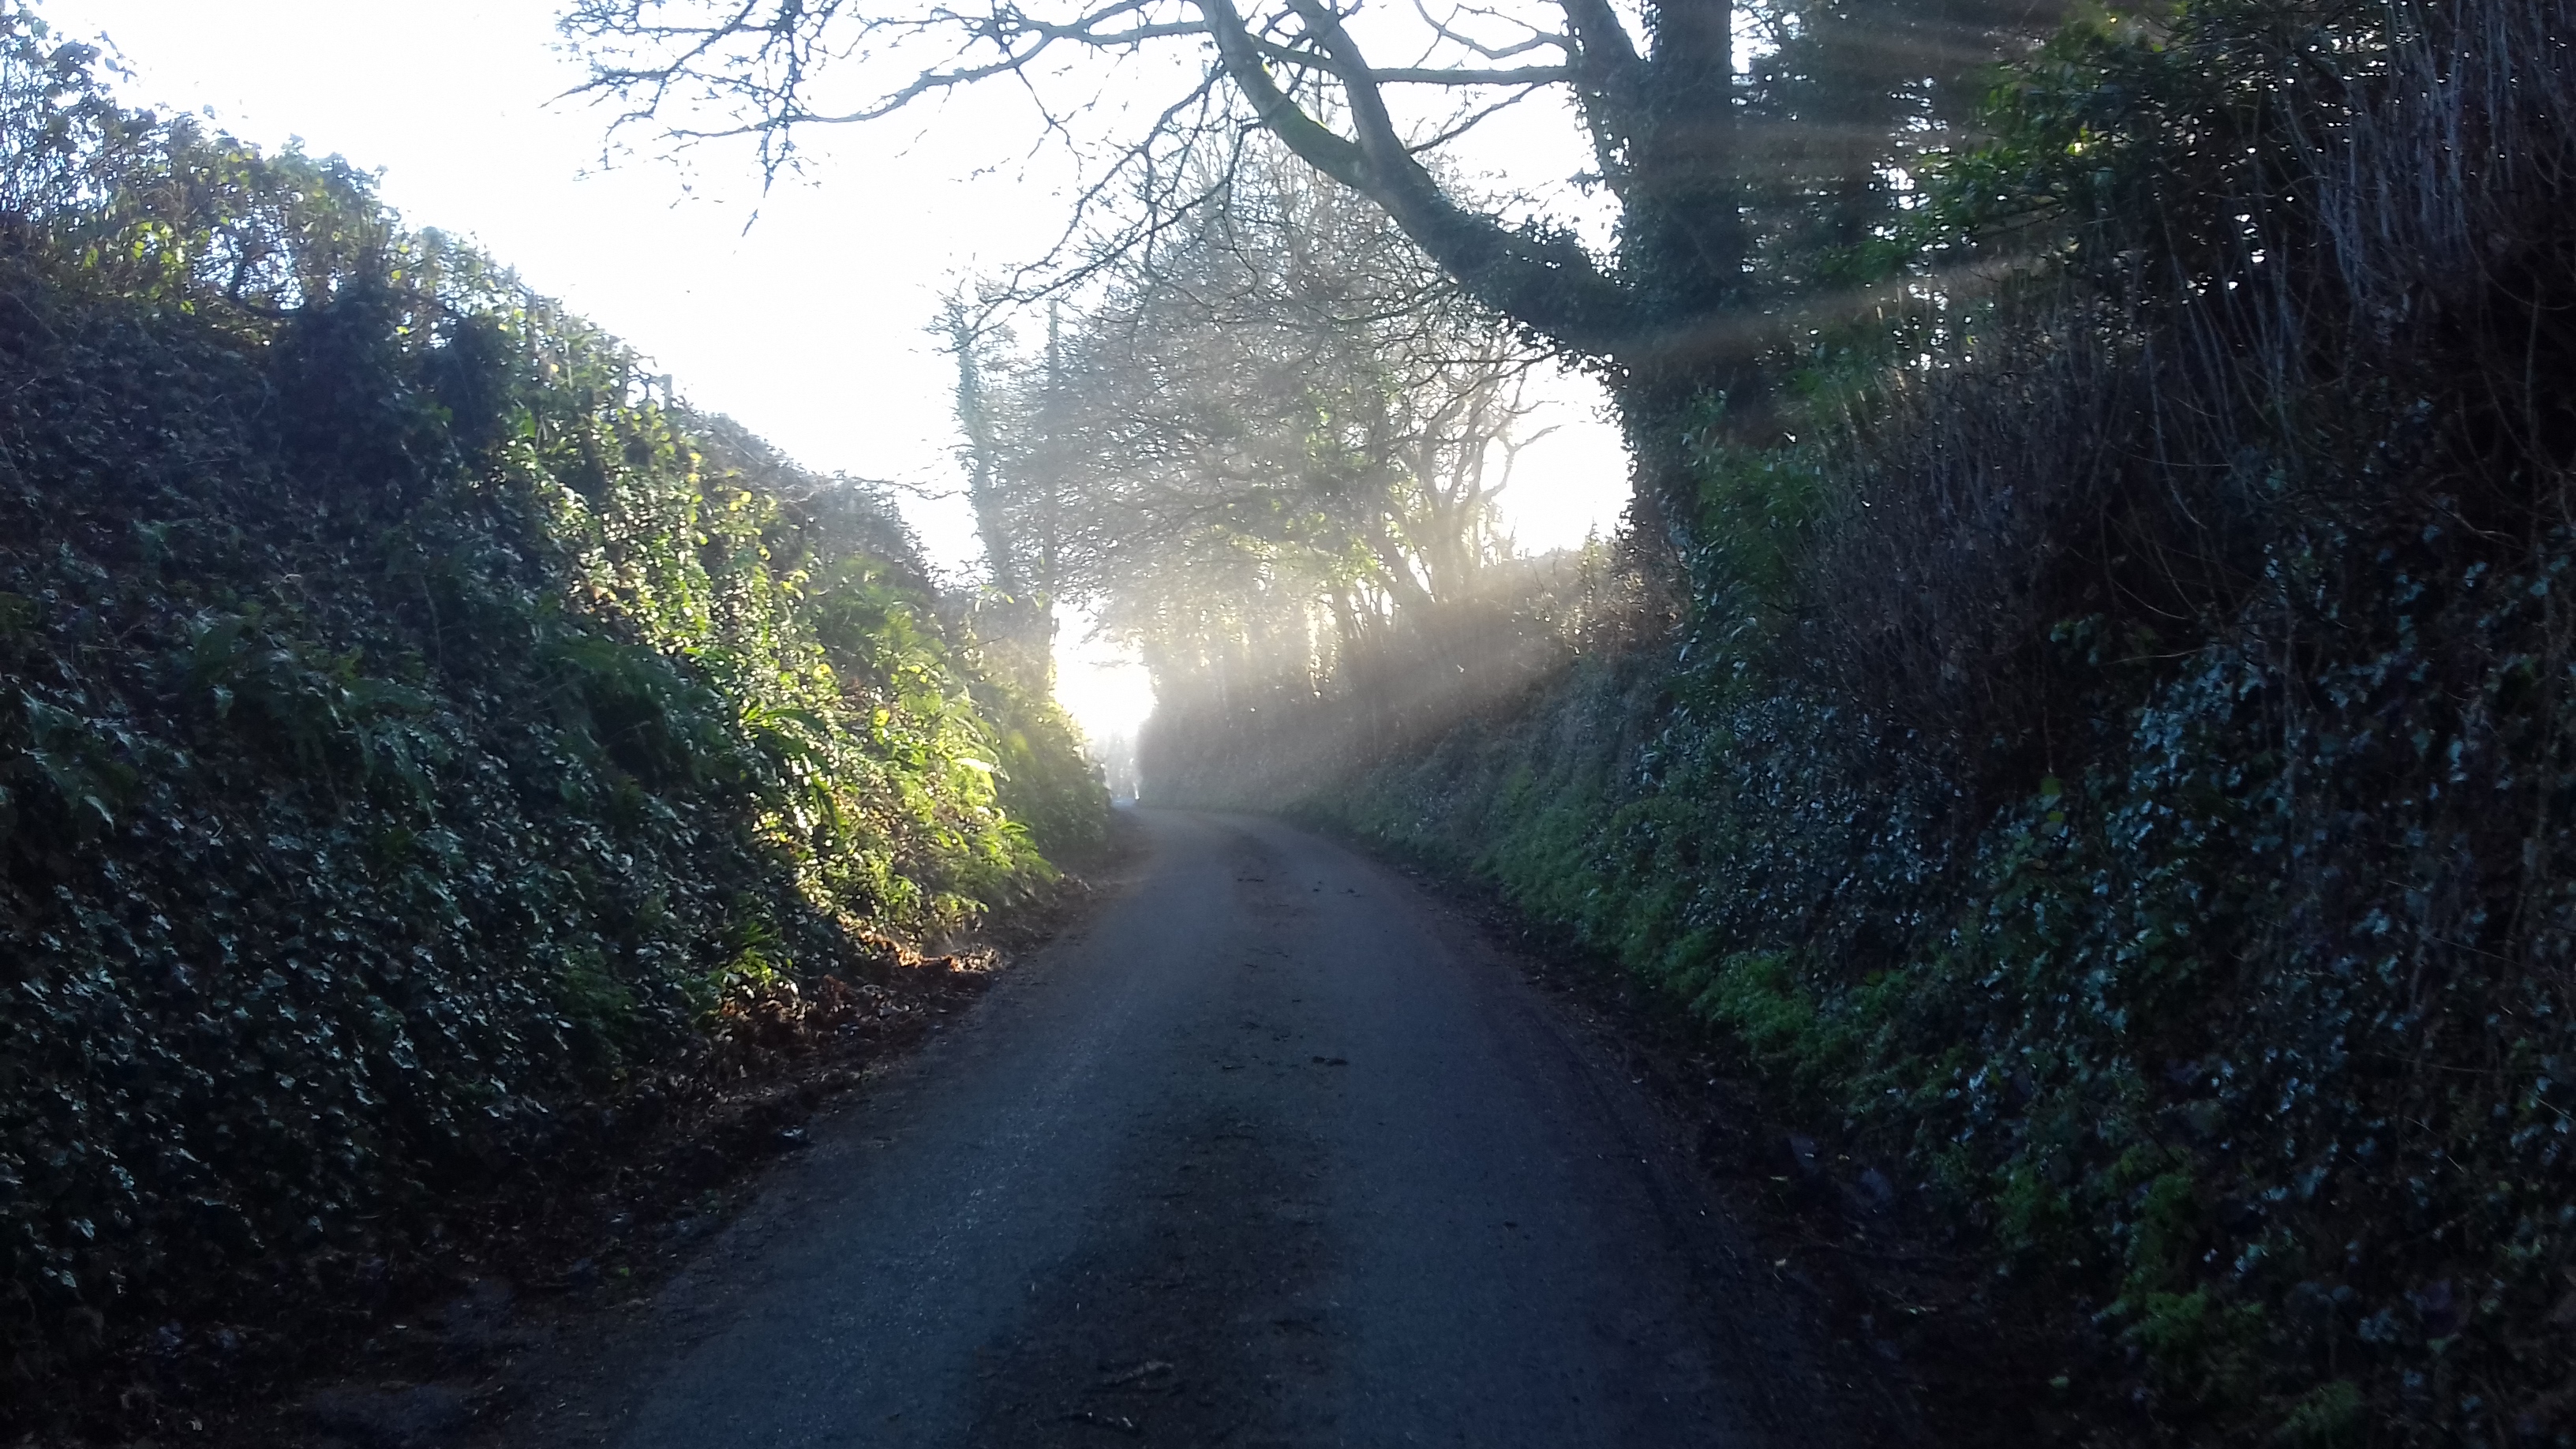 A country lane with trees and a beam of sunshine